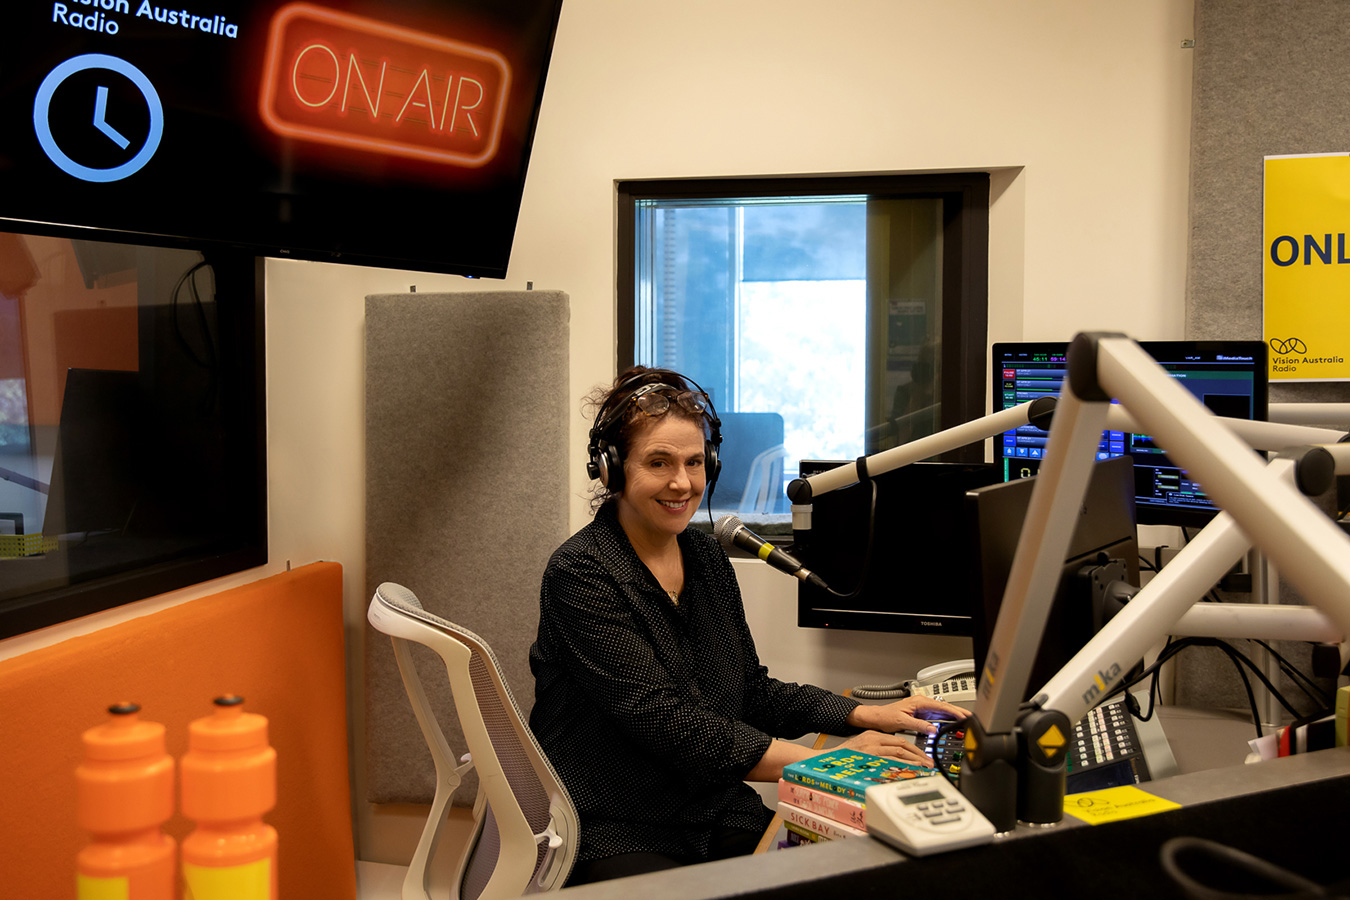 A middle-aged woman with dark hair and wearing a black top is smiling at the camera and sits at a radio studio desk. She is wearing headphones and a pile of books sits on the desk.